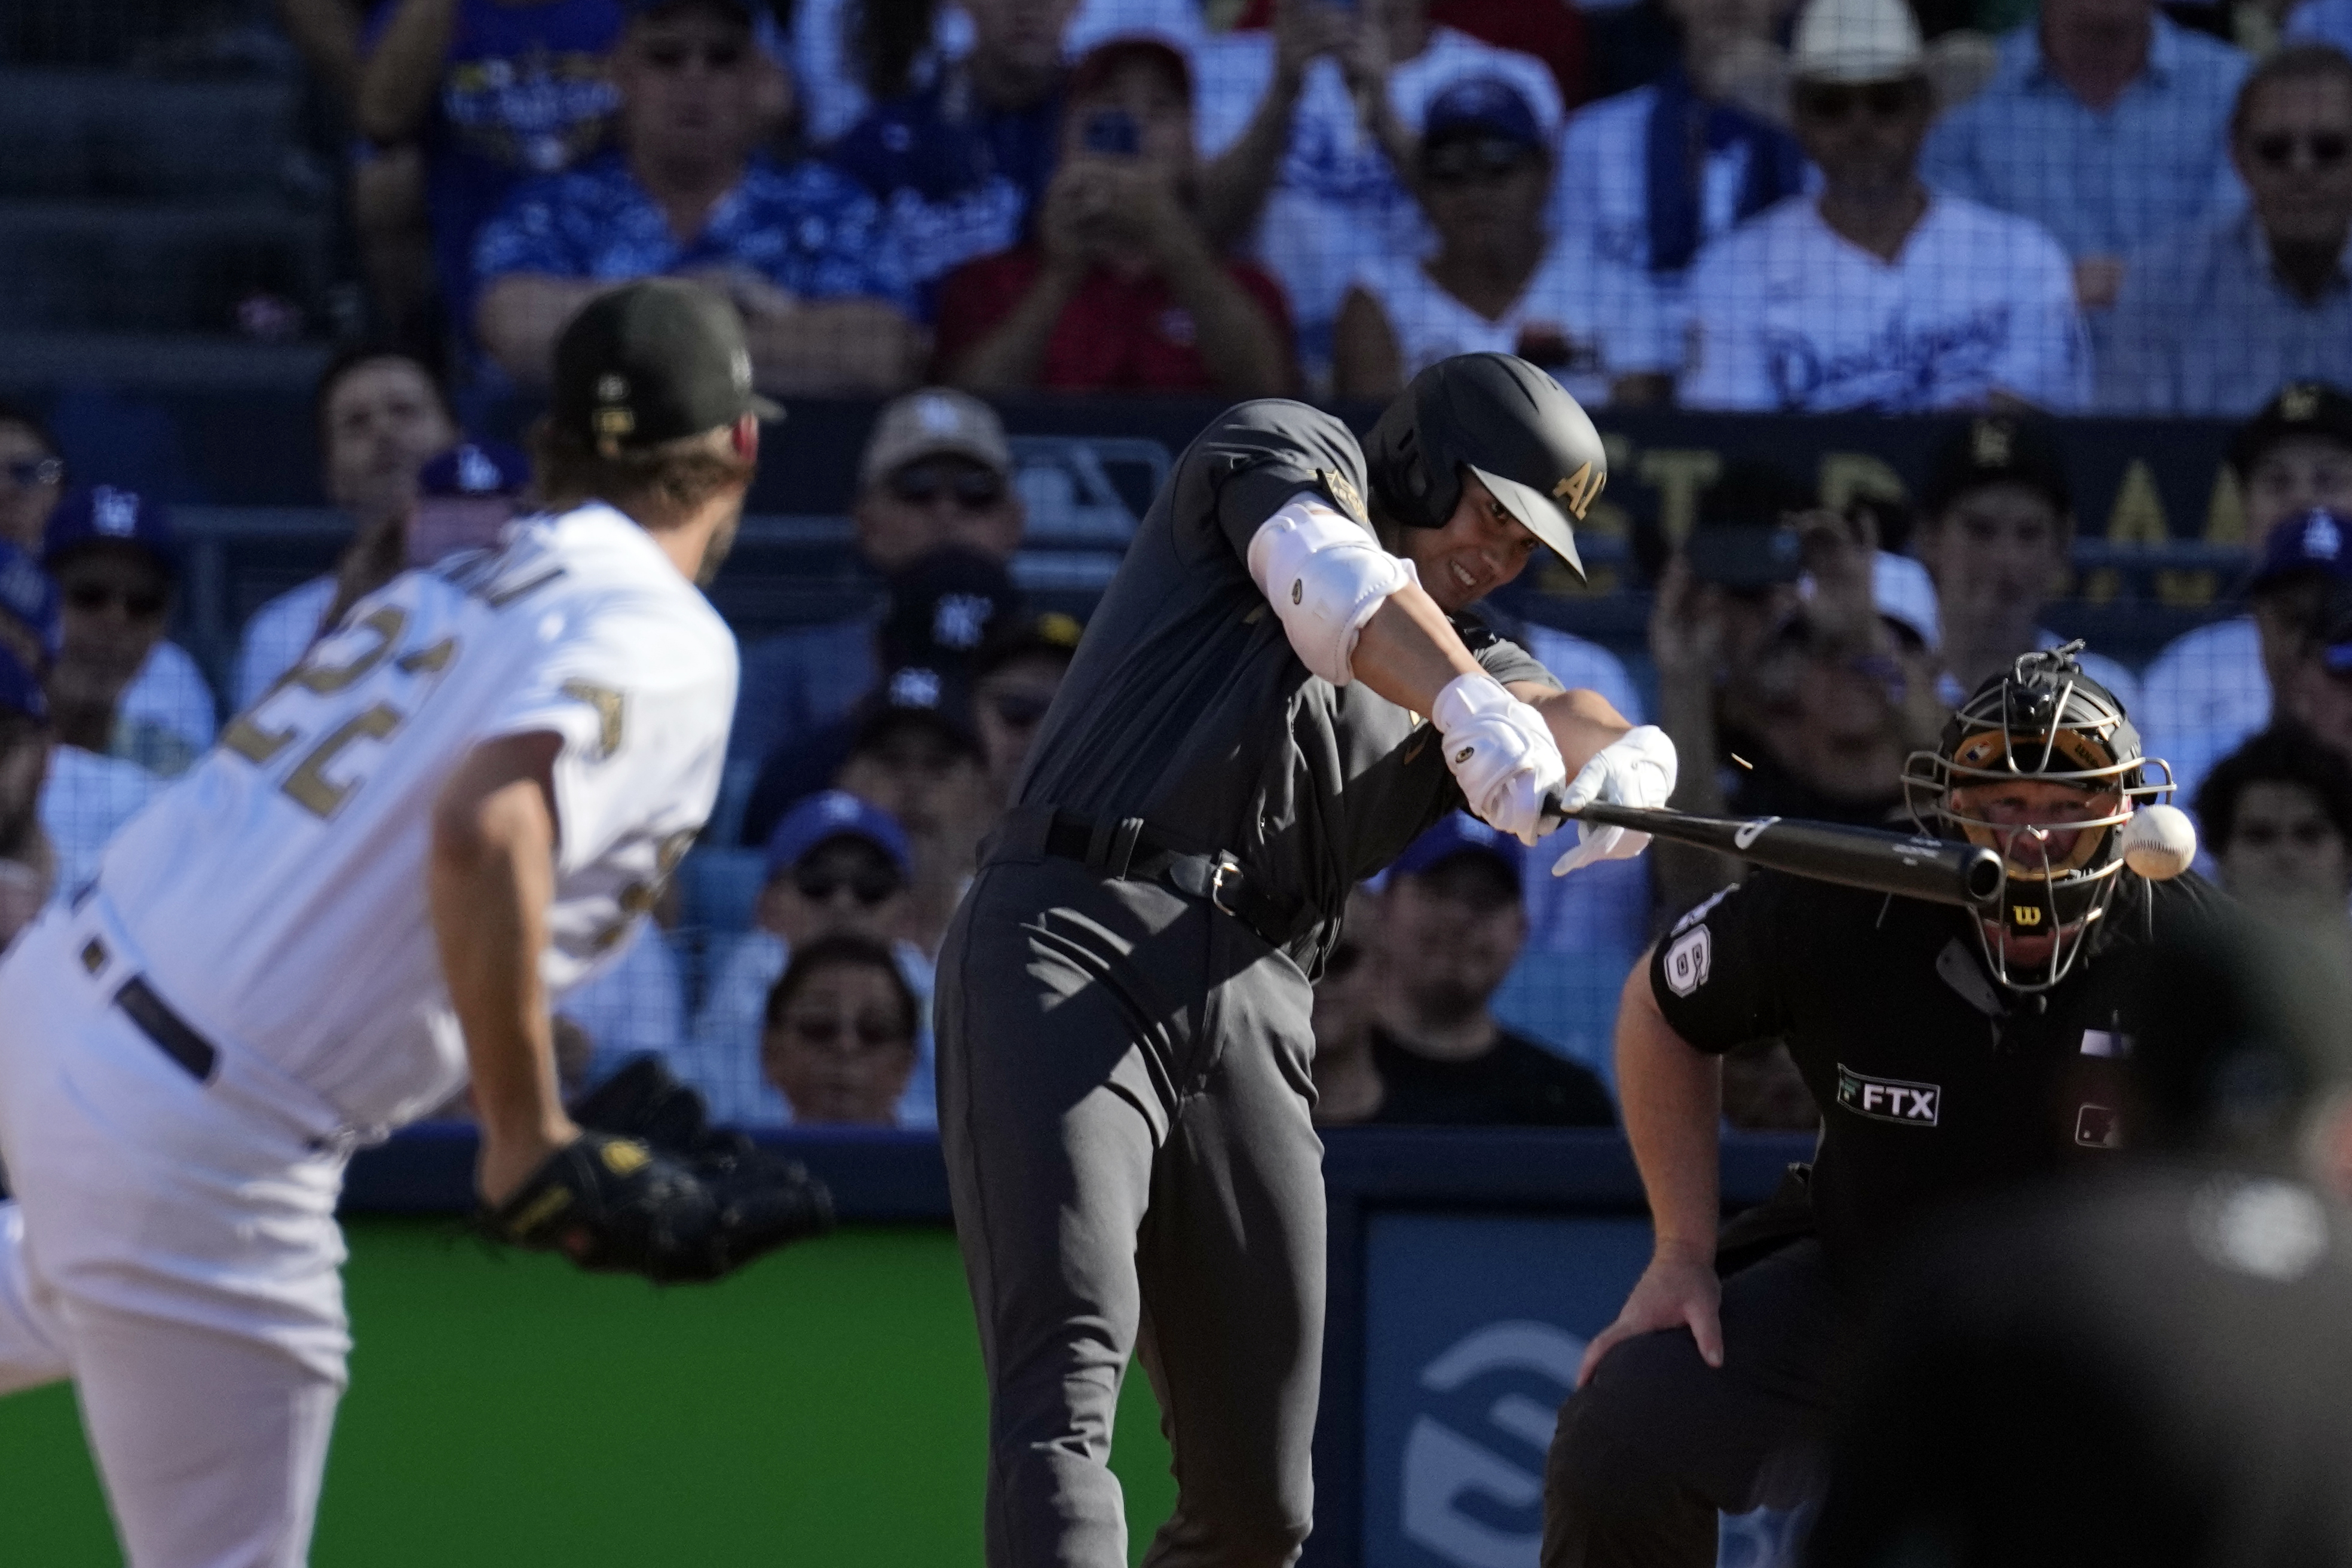 Shohei Ohtani calls his shot at MLB All-Star Game, gets picked off